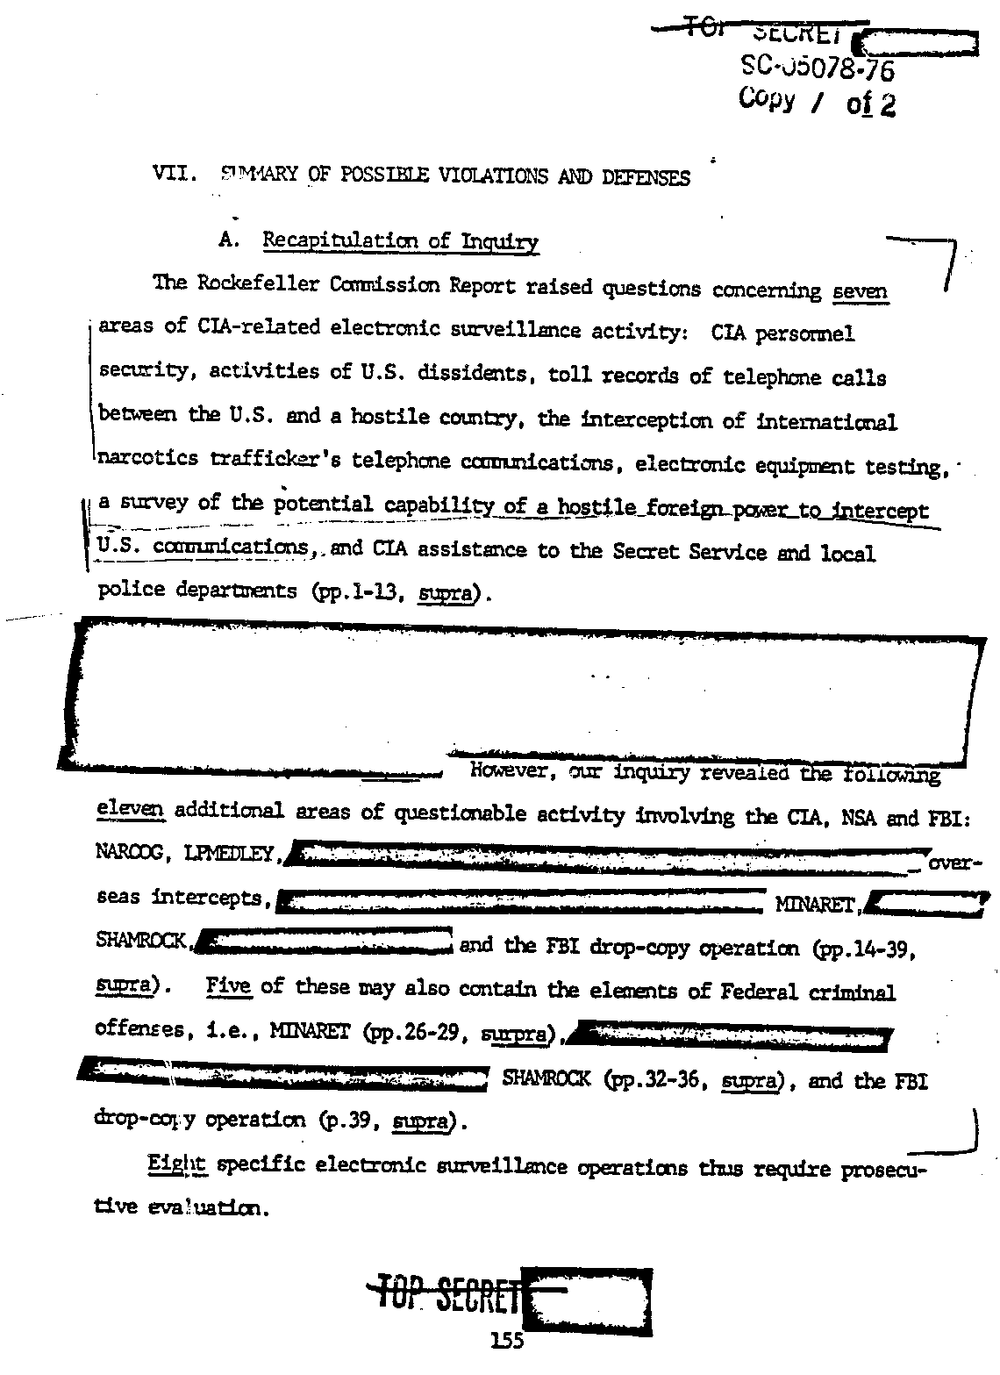 Page 163 from Report on Inquiry Into CIA Related Electronic Surveillance Activities